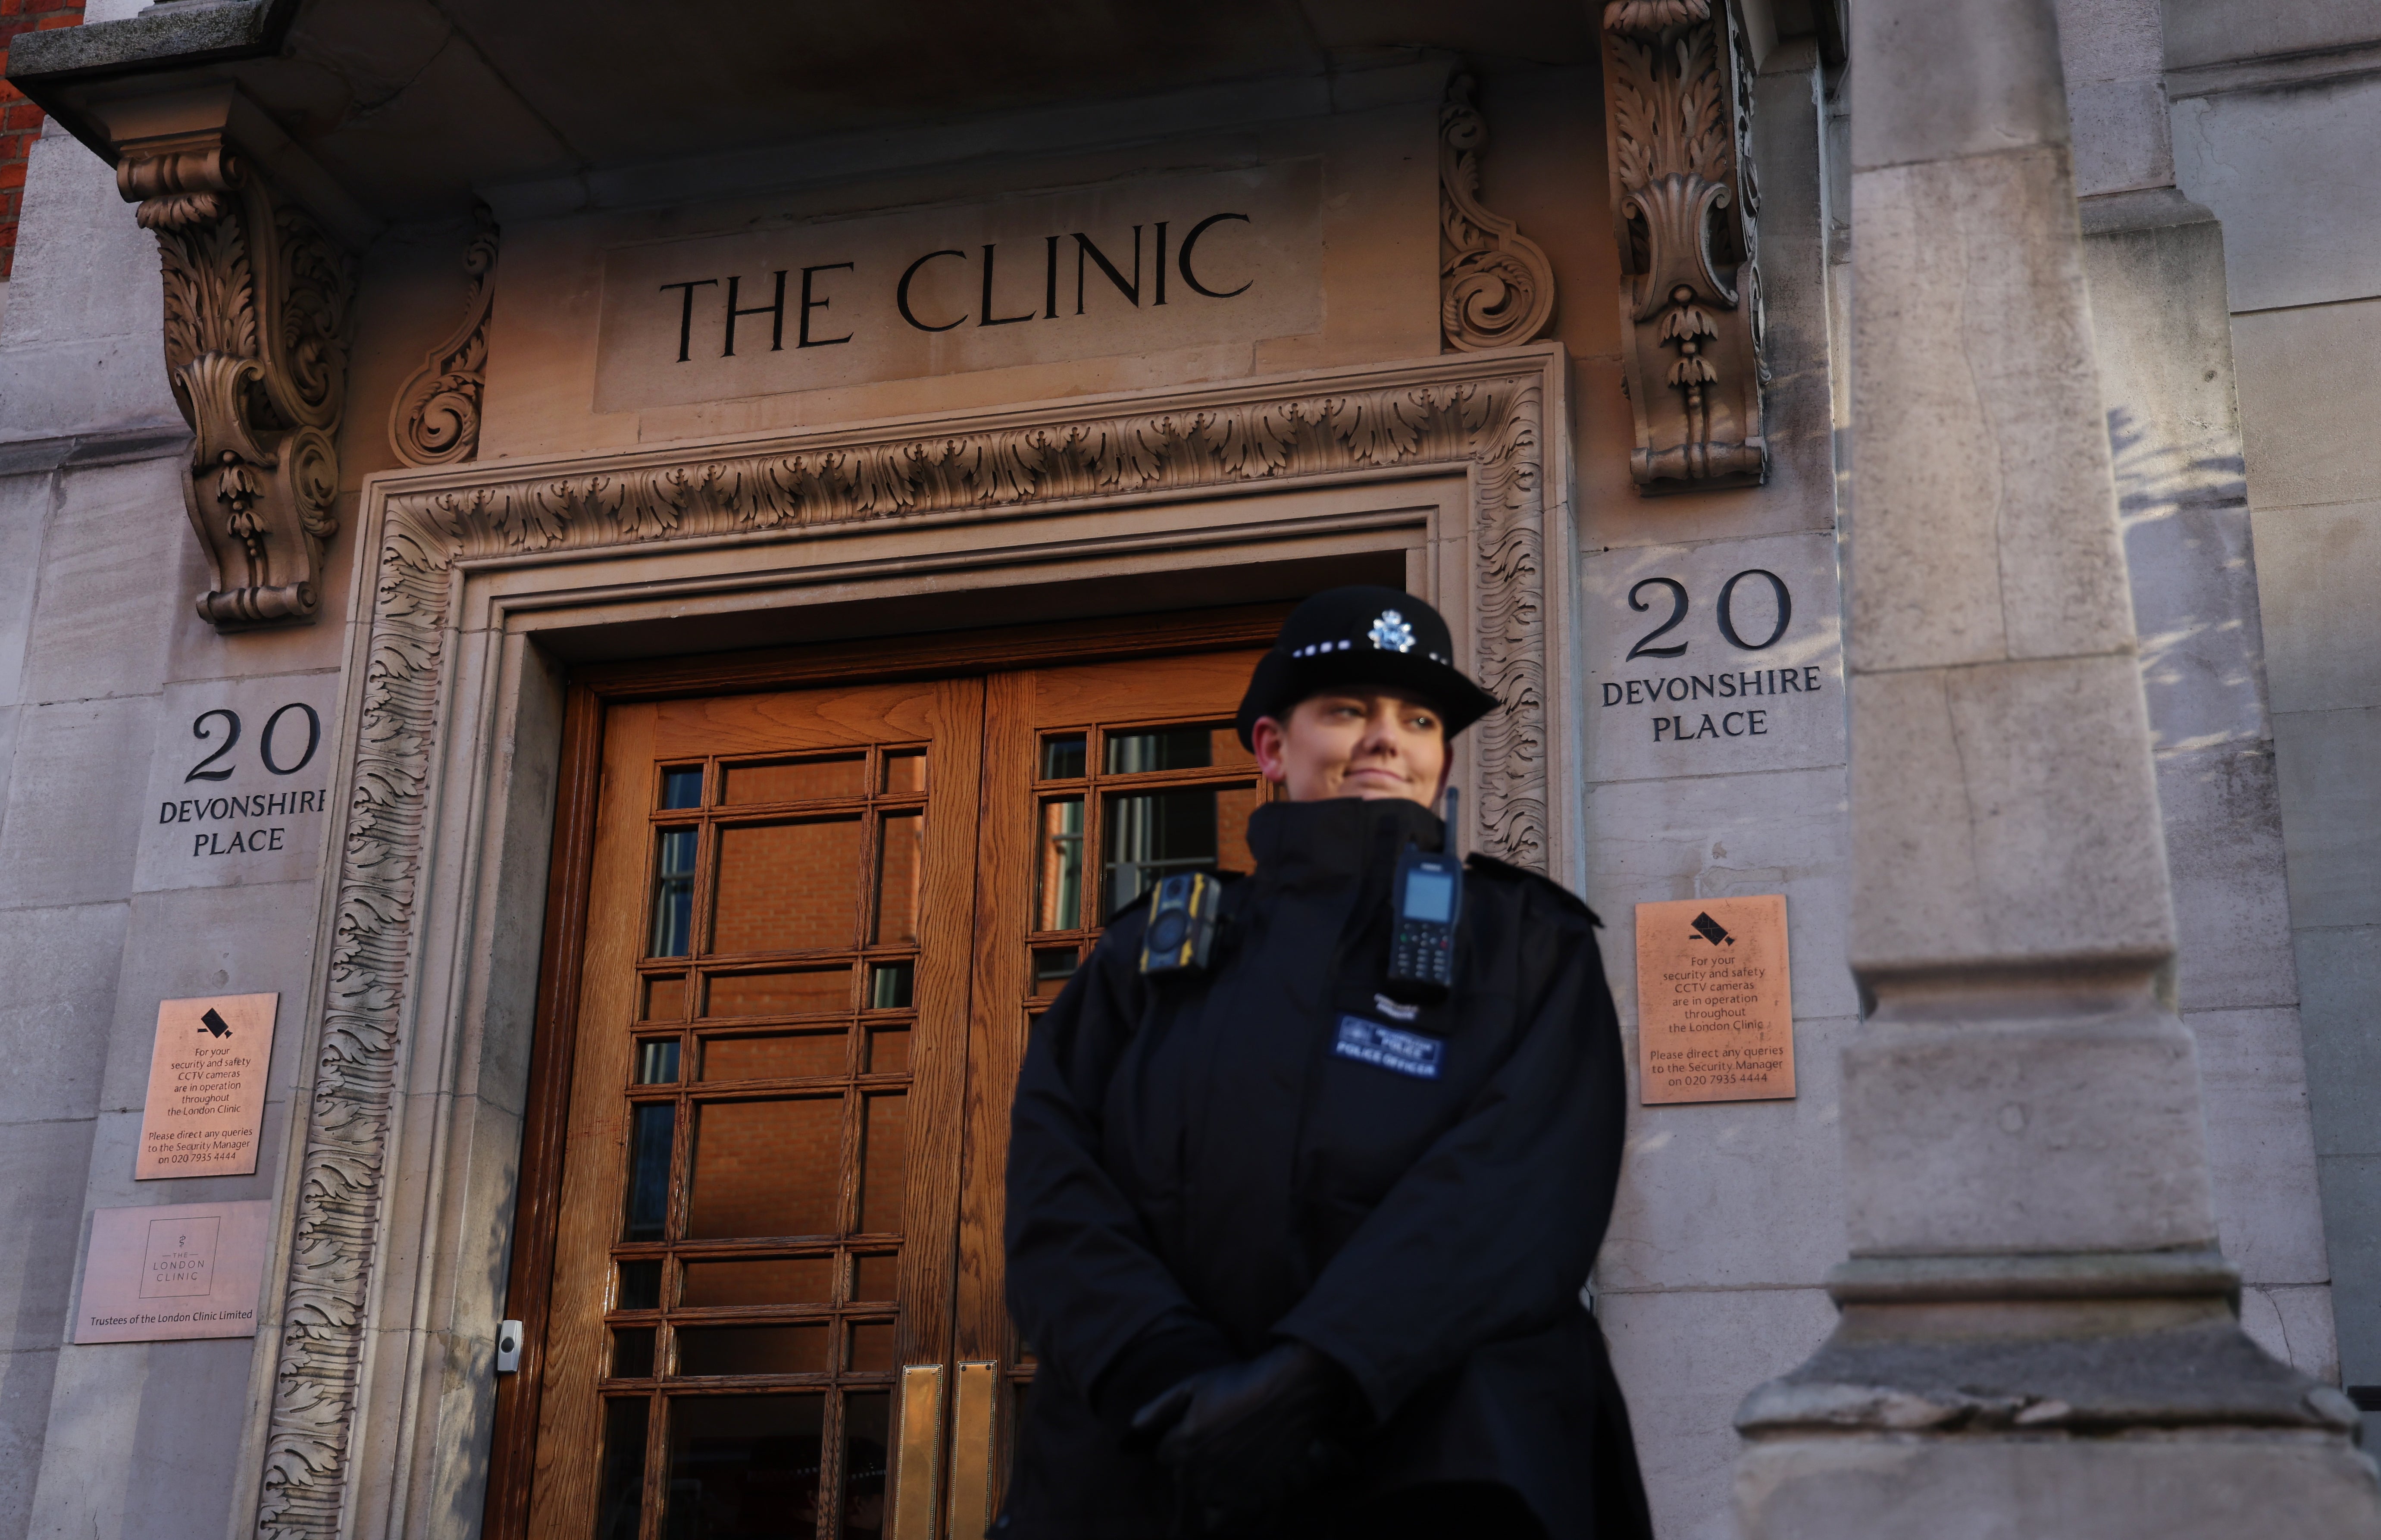 The exclusive, state-of-the art clinic in Marylebone was opened in 1932 by a group of Harley Street doctors and is one of the UK’s largest private hospitals